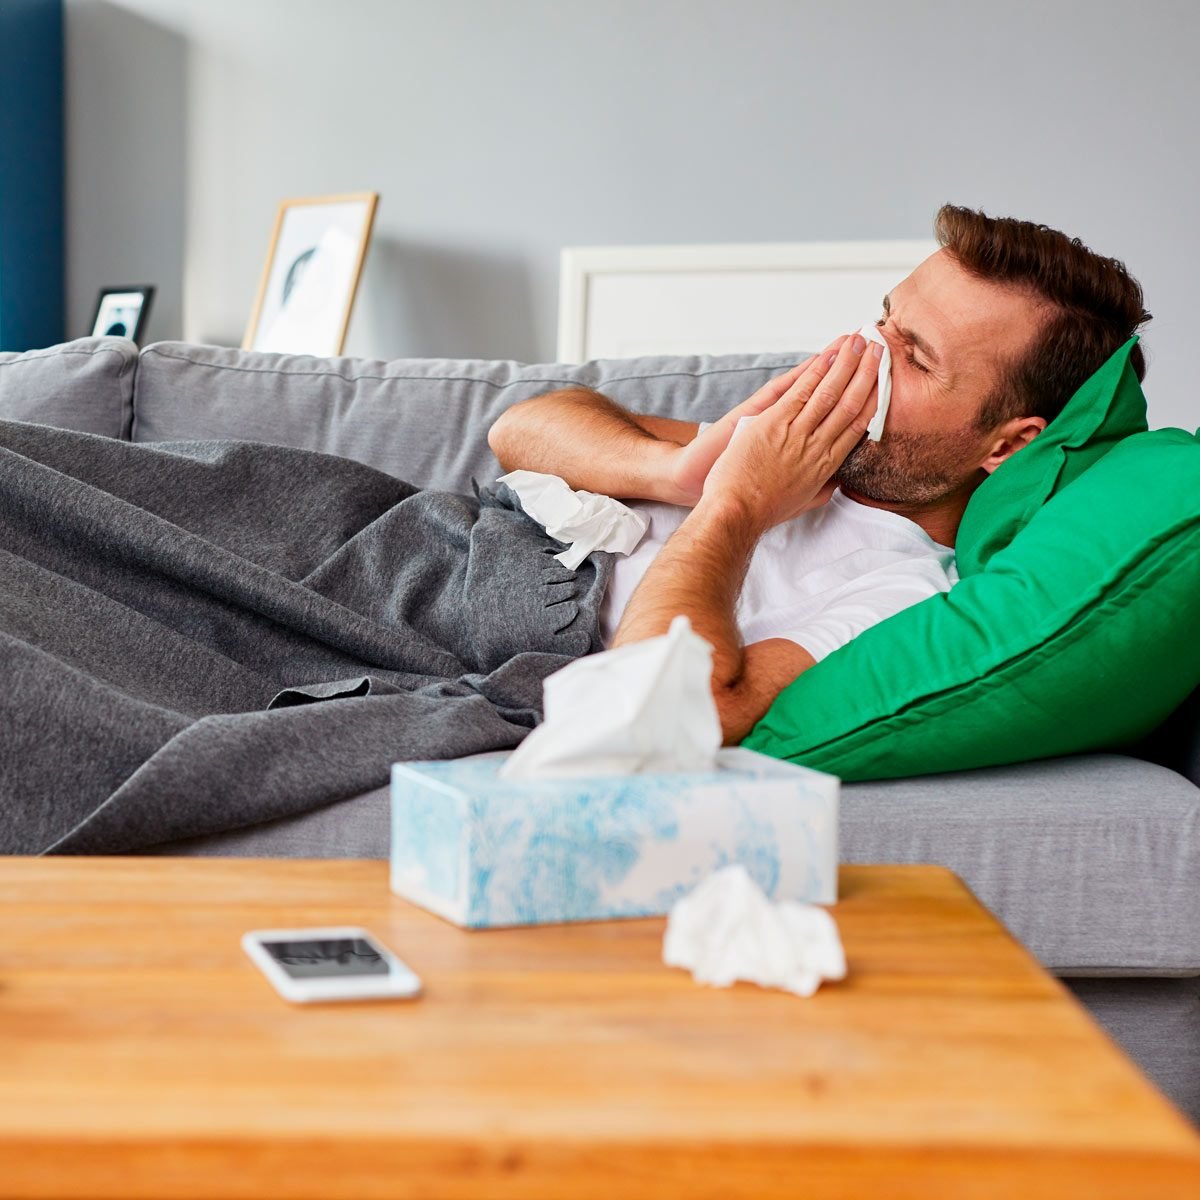 10 Things in Your Home That May Be Making You Sick